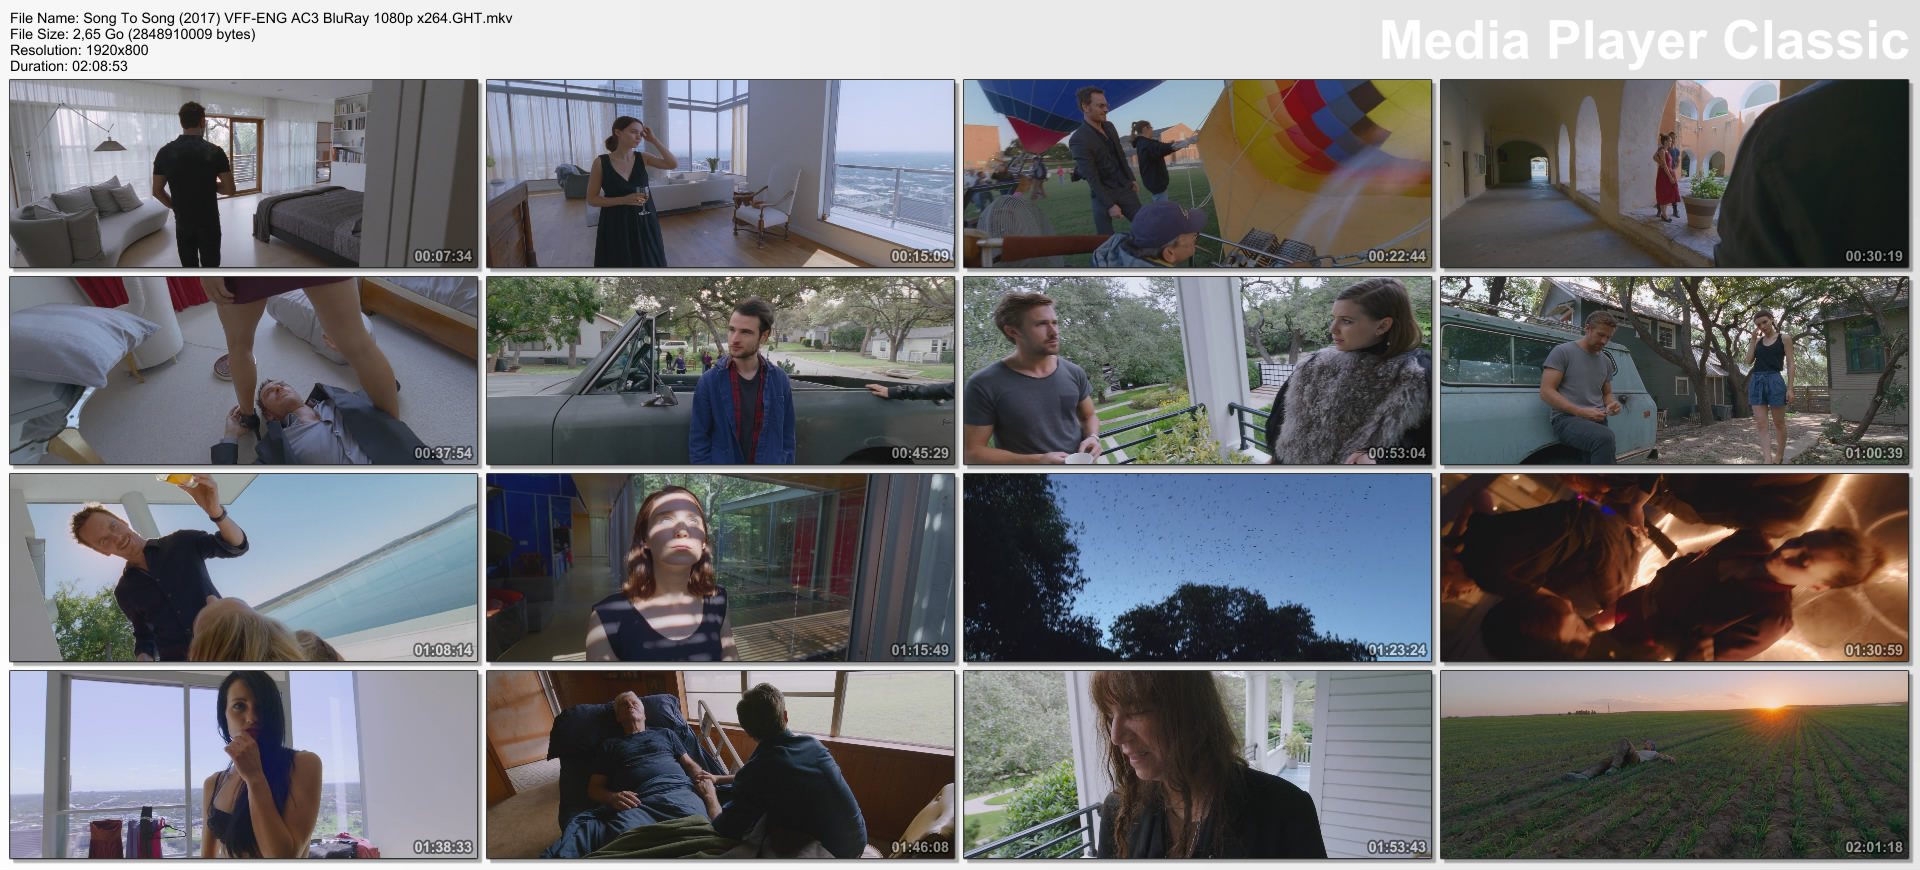 Song To Song (2017) VFF-ENG AC3 BluRay 1080p x264